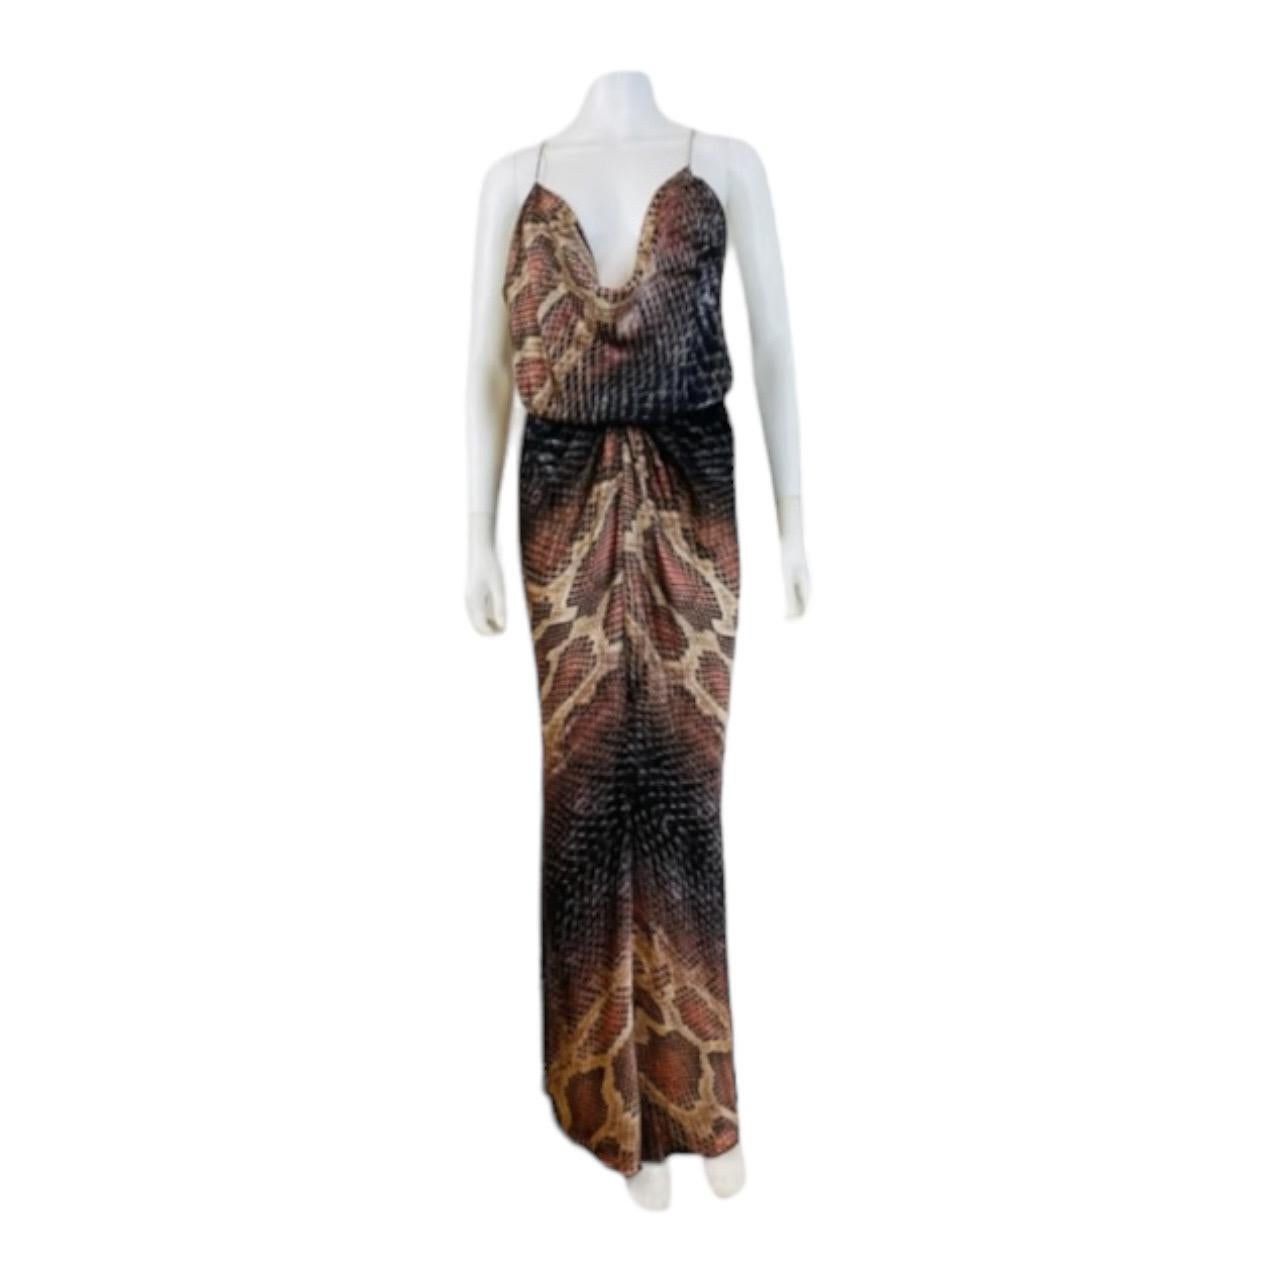 2000s Y2K Roberto Cavalli Silk Dress Gown
Incredible python snake print silk fabric
Draped neckline with loose fitting bodice
Halter neckline
Nipped waistline
Thin shoulder straps 
Hidden side zip at the waist
Long maxi length skirt
Unlined

Marked